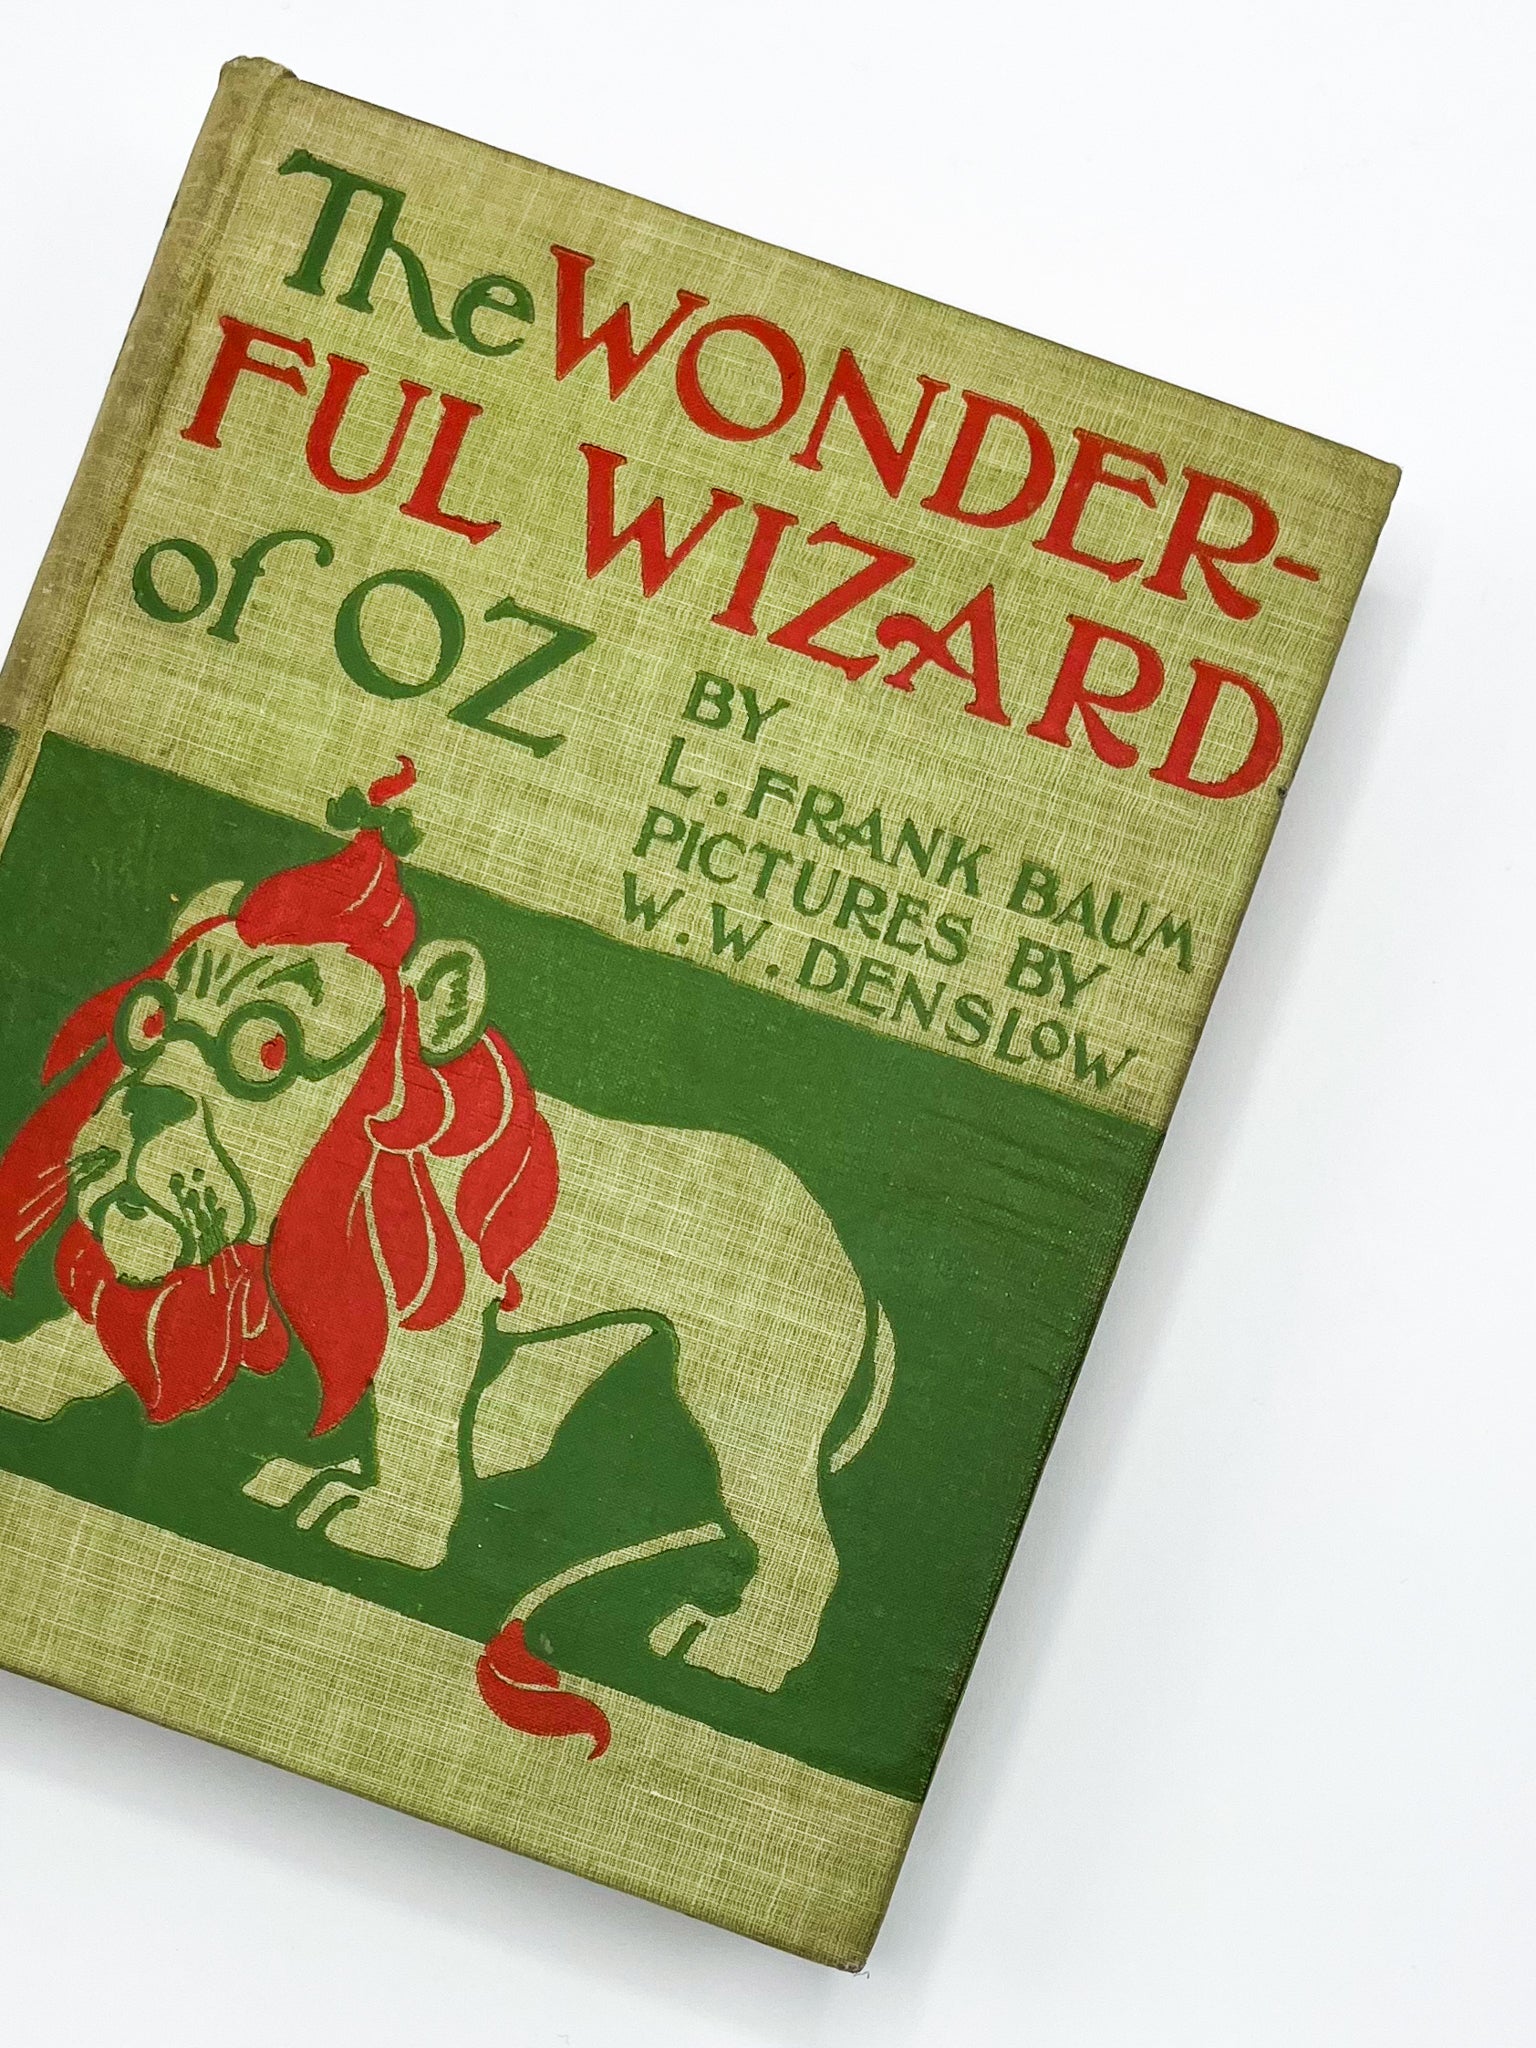 The Wonderful Wizard of Oz: First Edition